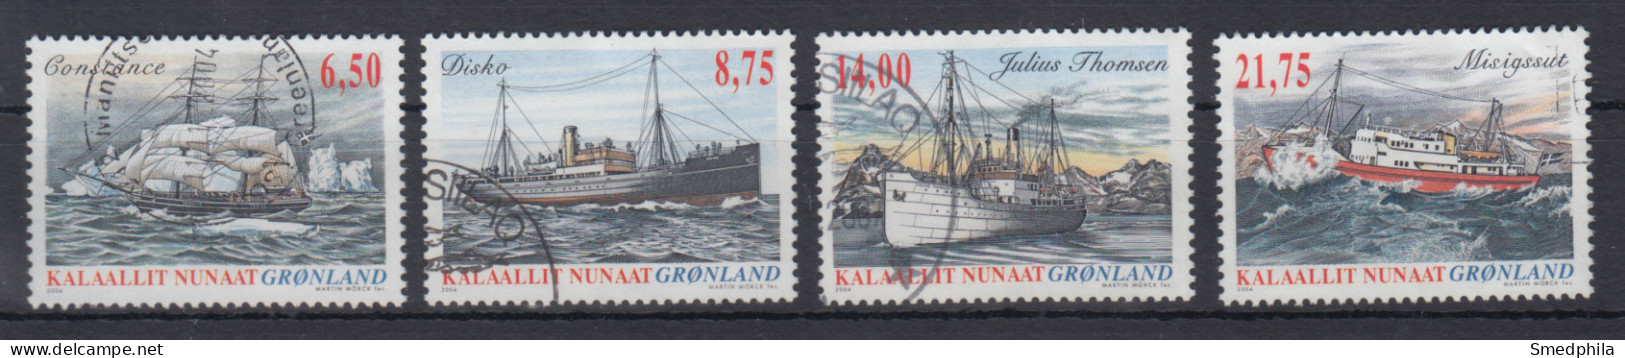 Greenland 2004 - Michel 423-426 Used - Used Stamps